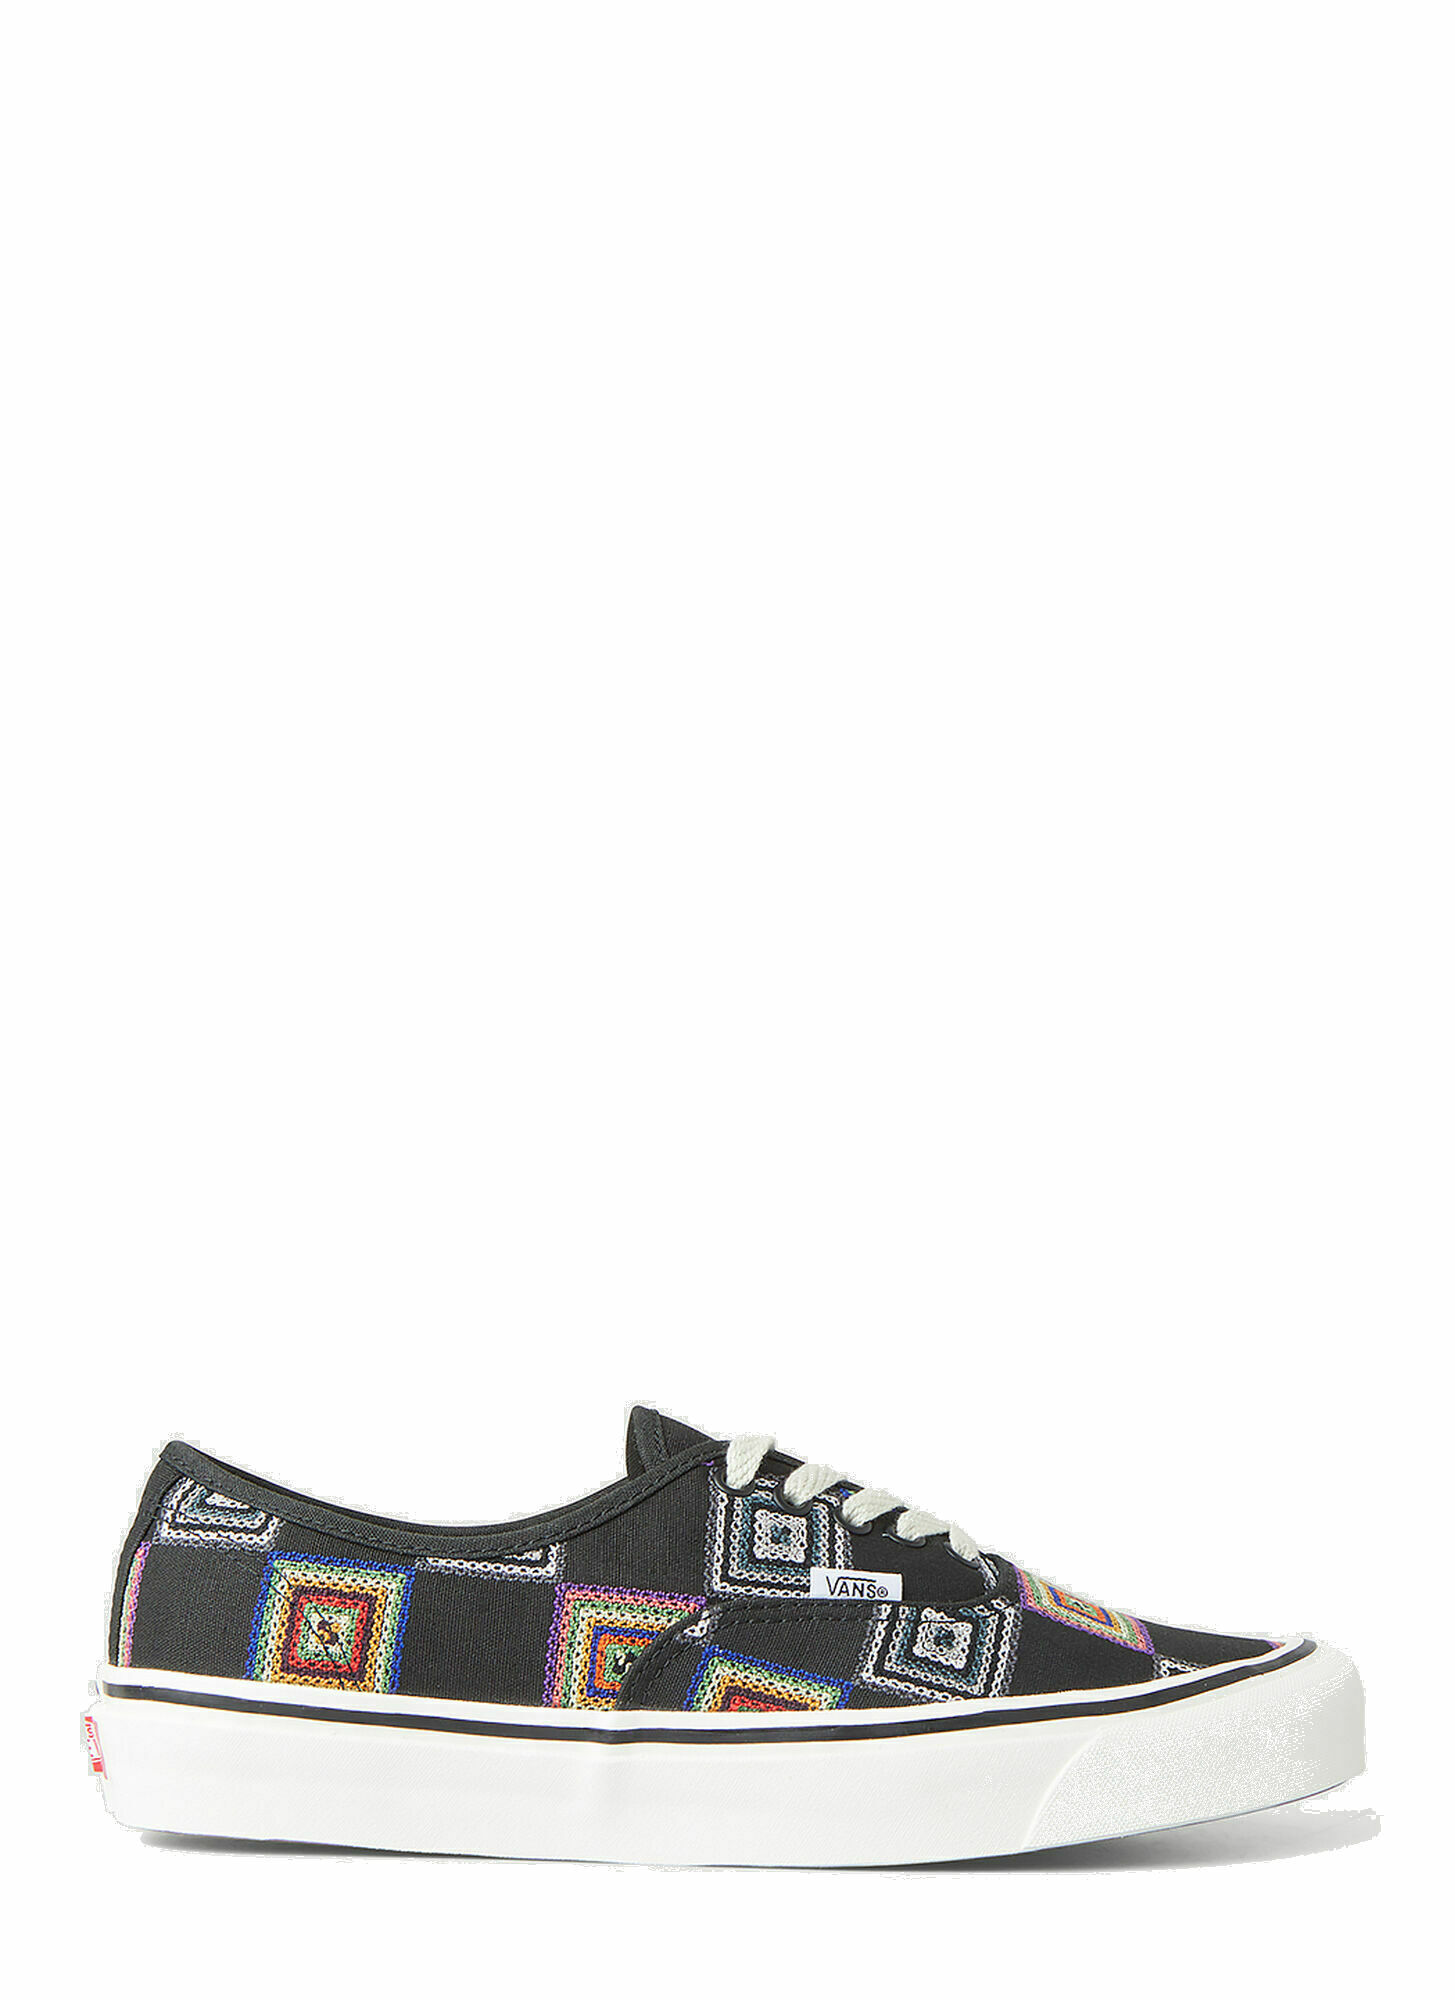 UA Authentic 44 DX Granny Check Sneakers in Black Vans